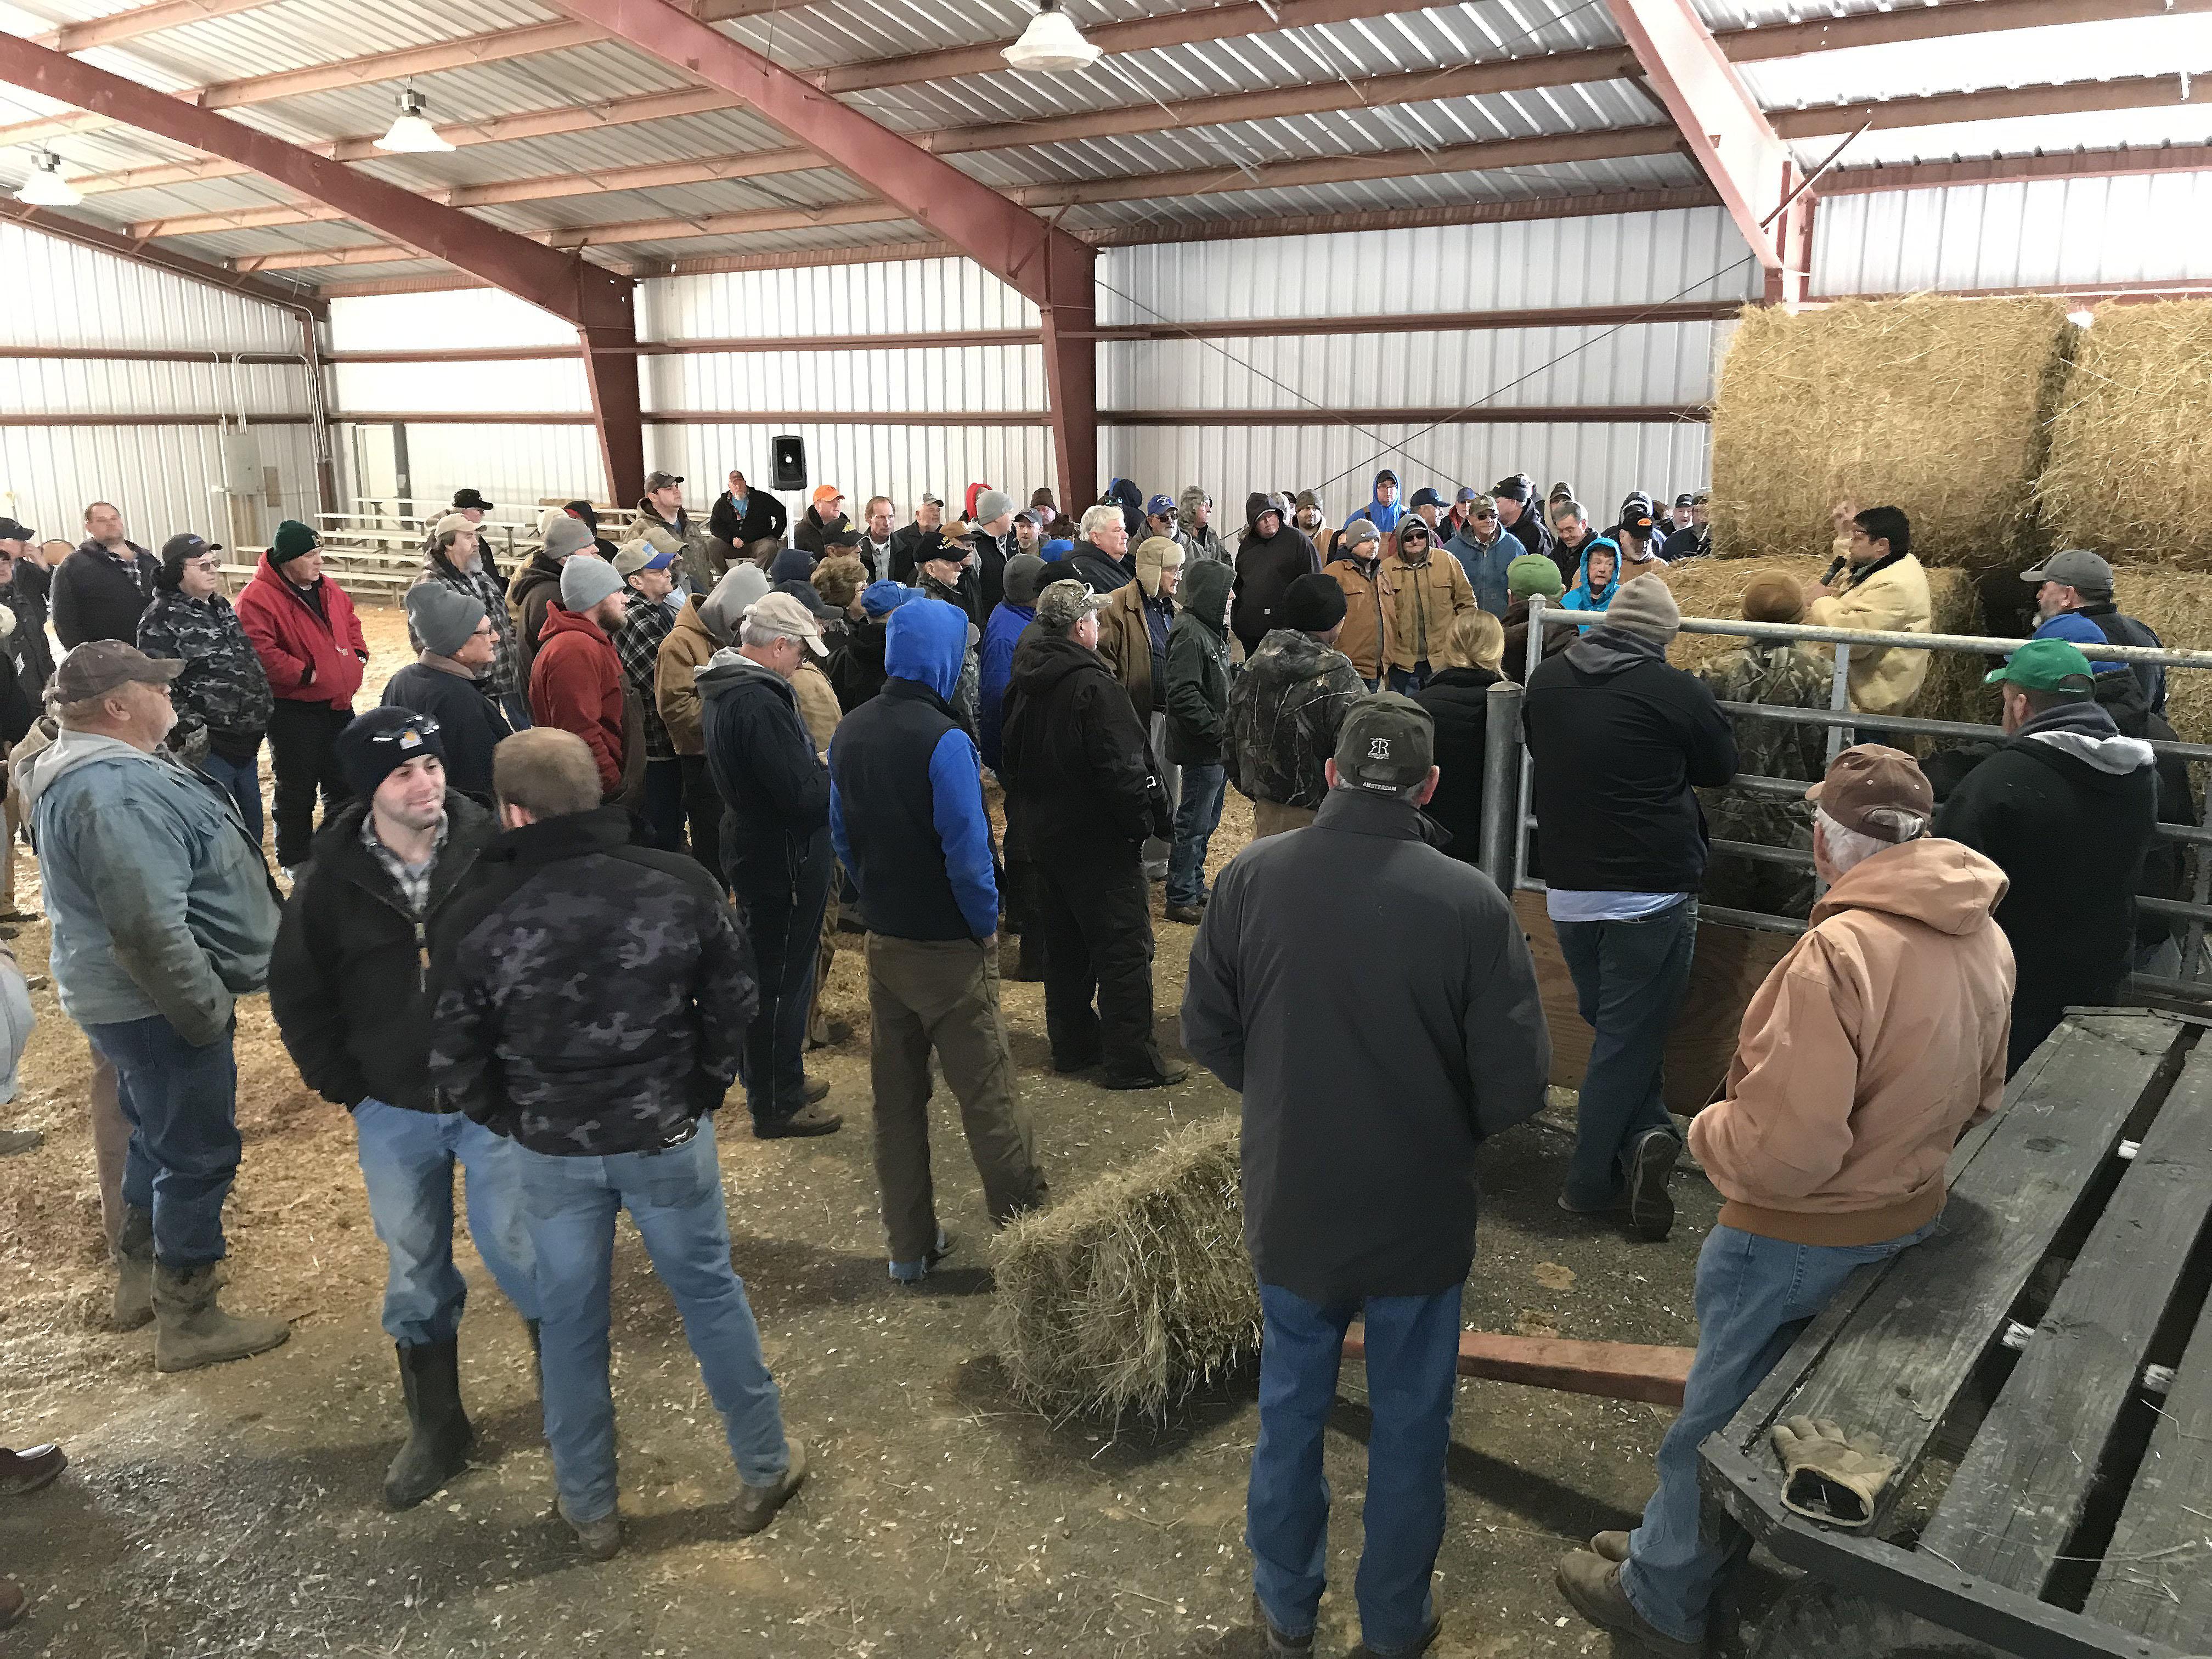 Producers bid on hay at the Tri-County Hay and Straw Auction in Metcalfe County. Photo by Kevin Lyons, Monroe County agriculture and natural resources extension agent.